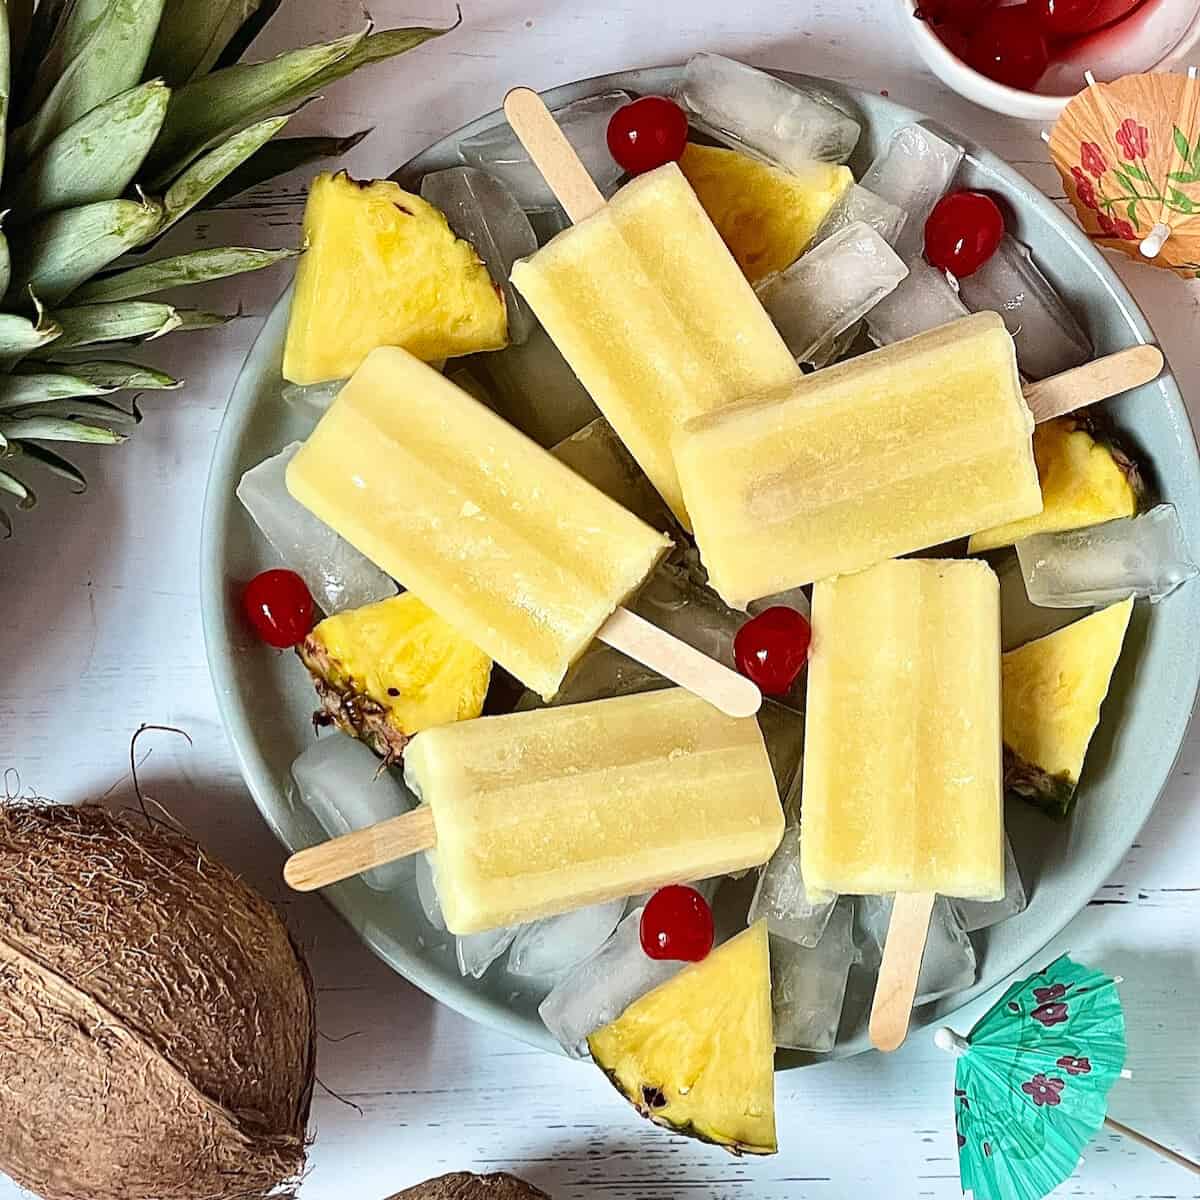 Pina colada popsicles over ice on a grey plate surrounded by cherries